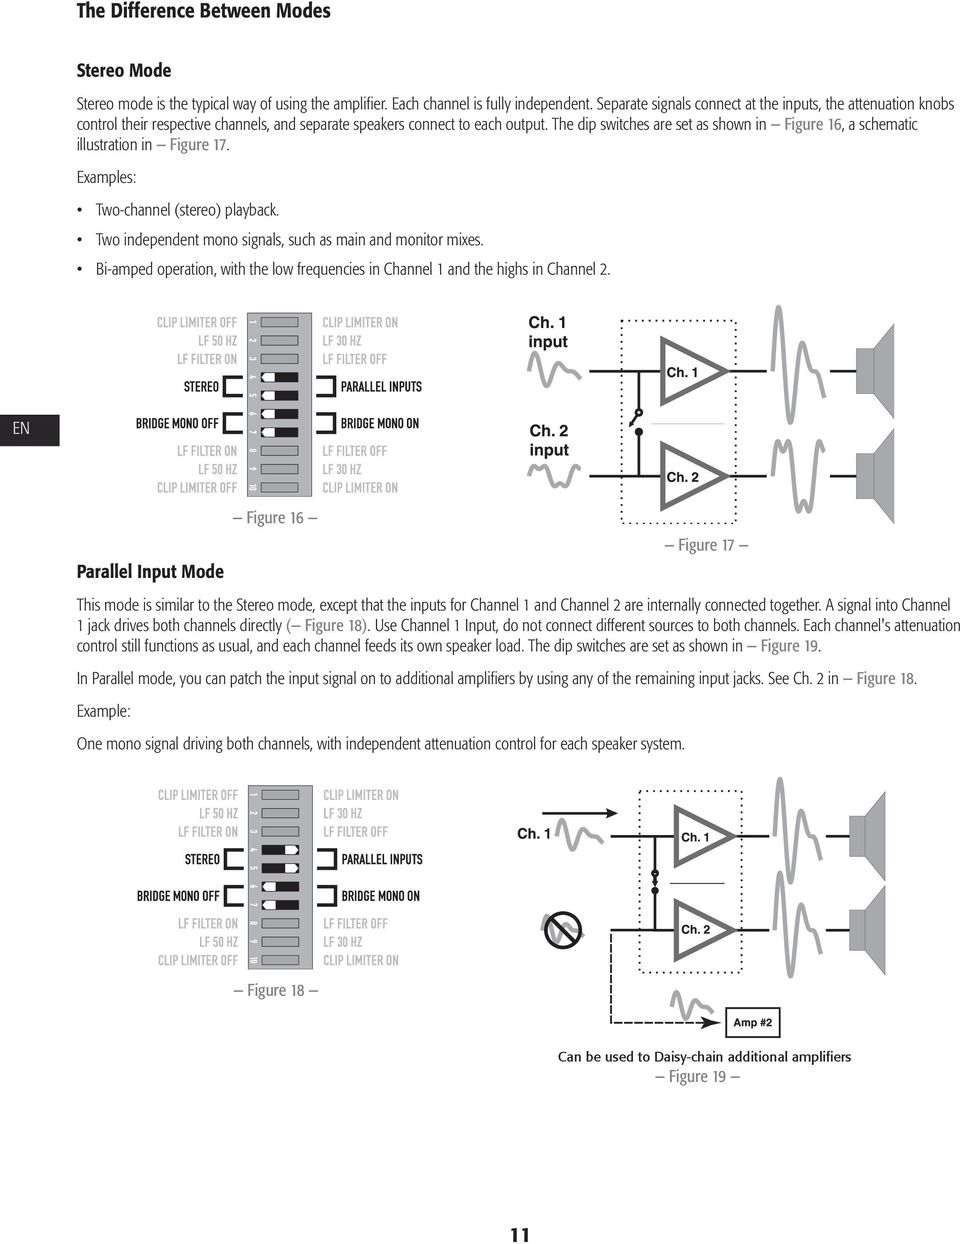 The dip switches are set as shown in ù Figure 16, a schematic illustration in ù Figure 17. Examples: ò Two-channel (stereo) playback. ò Two independent mono signals, such as main and monitor mixes.